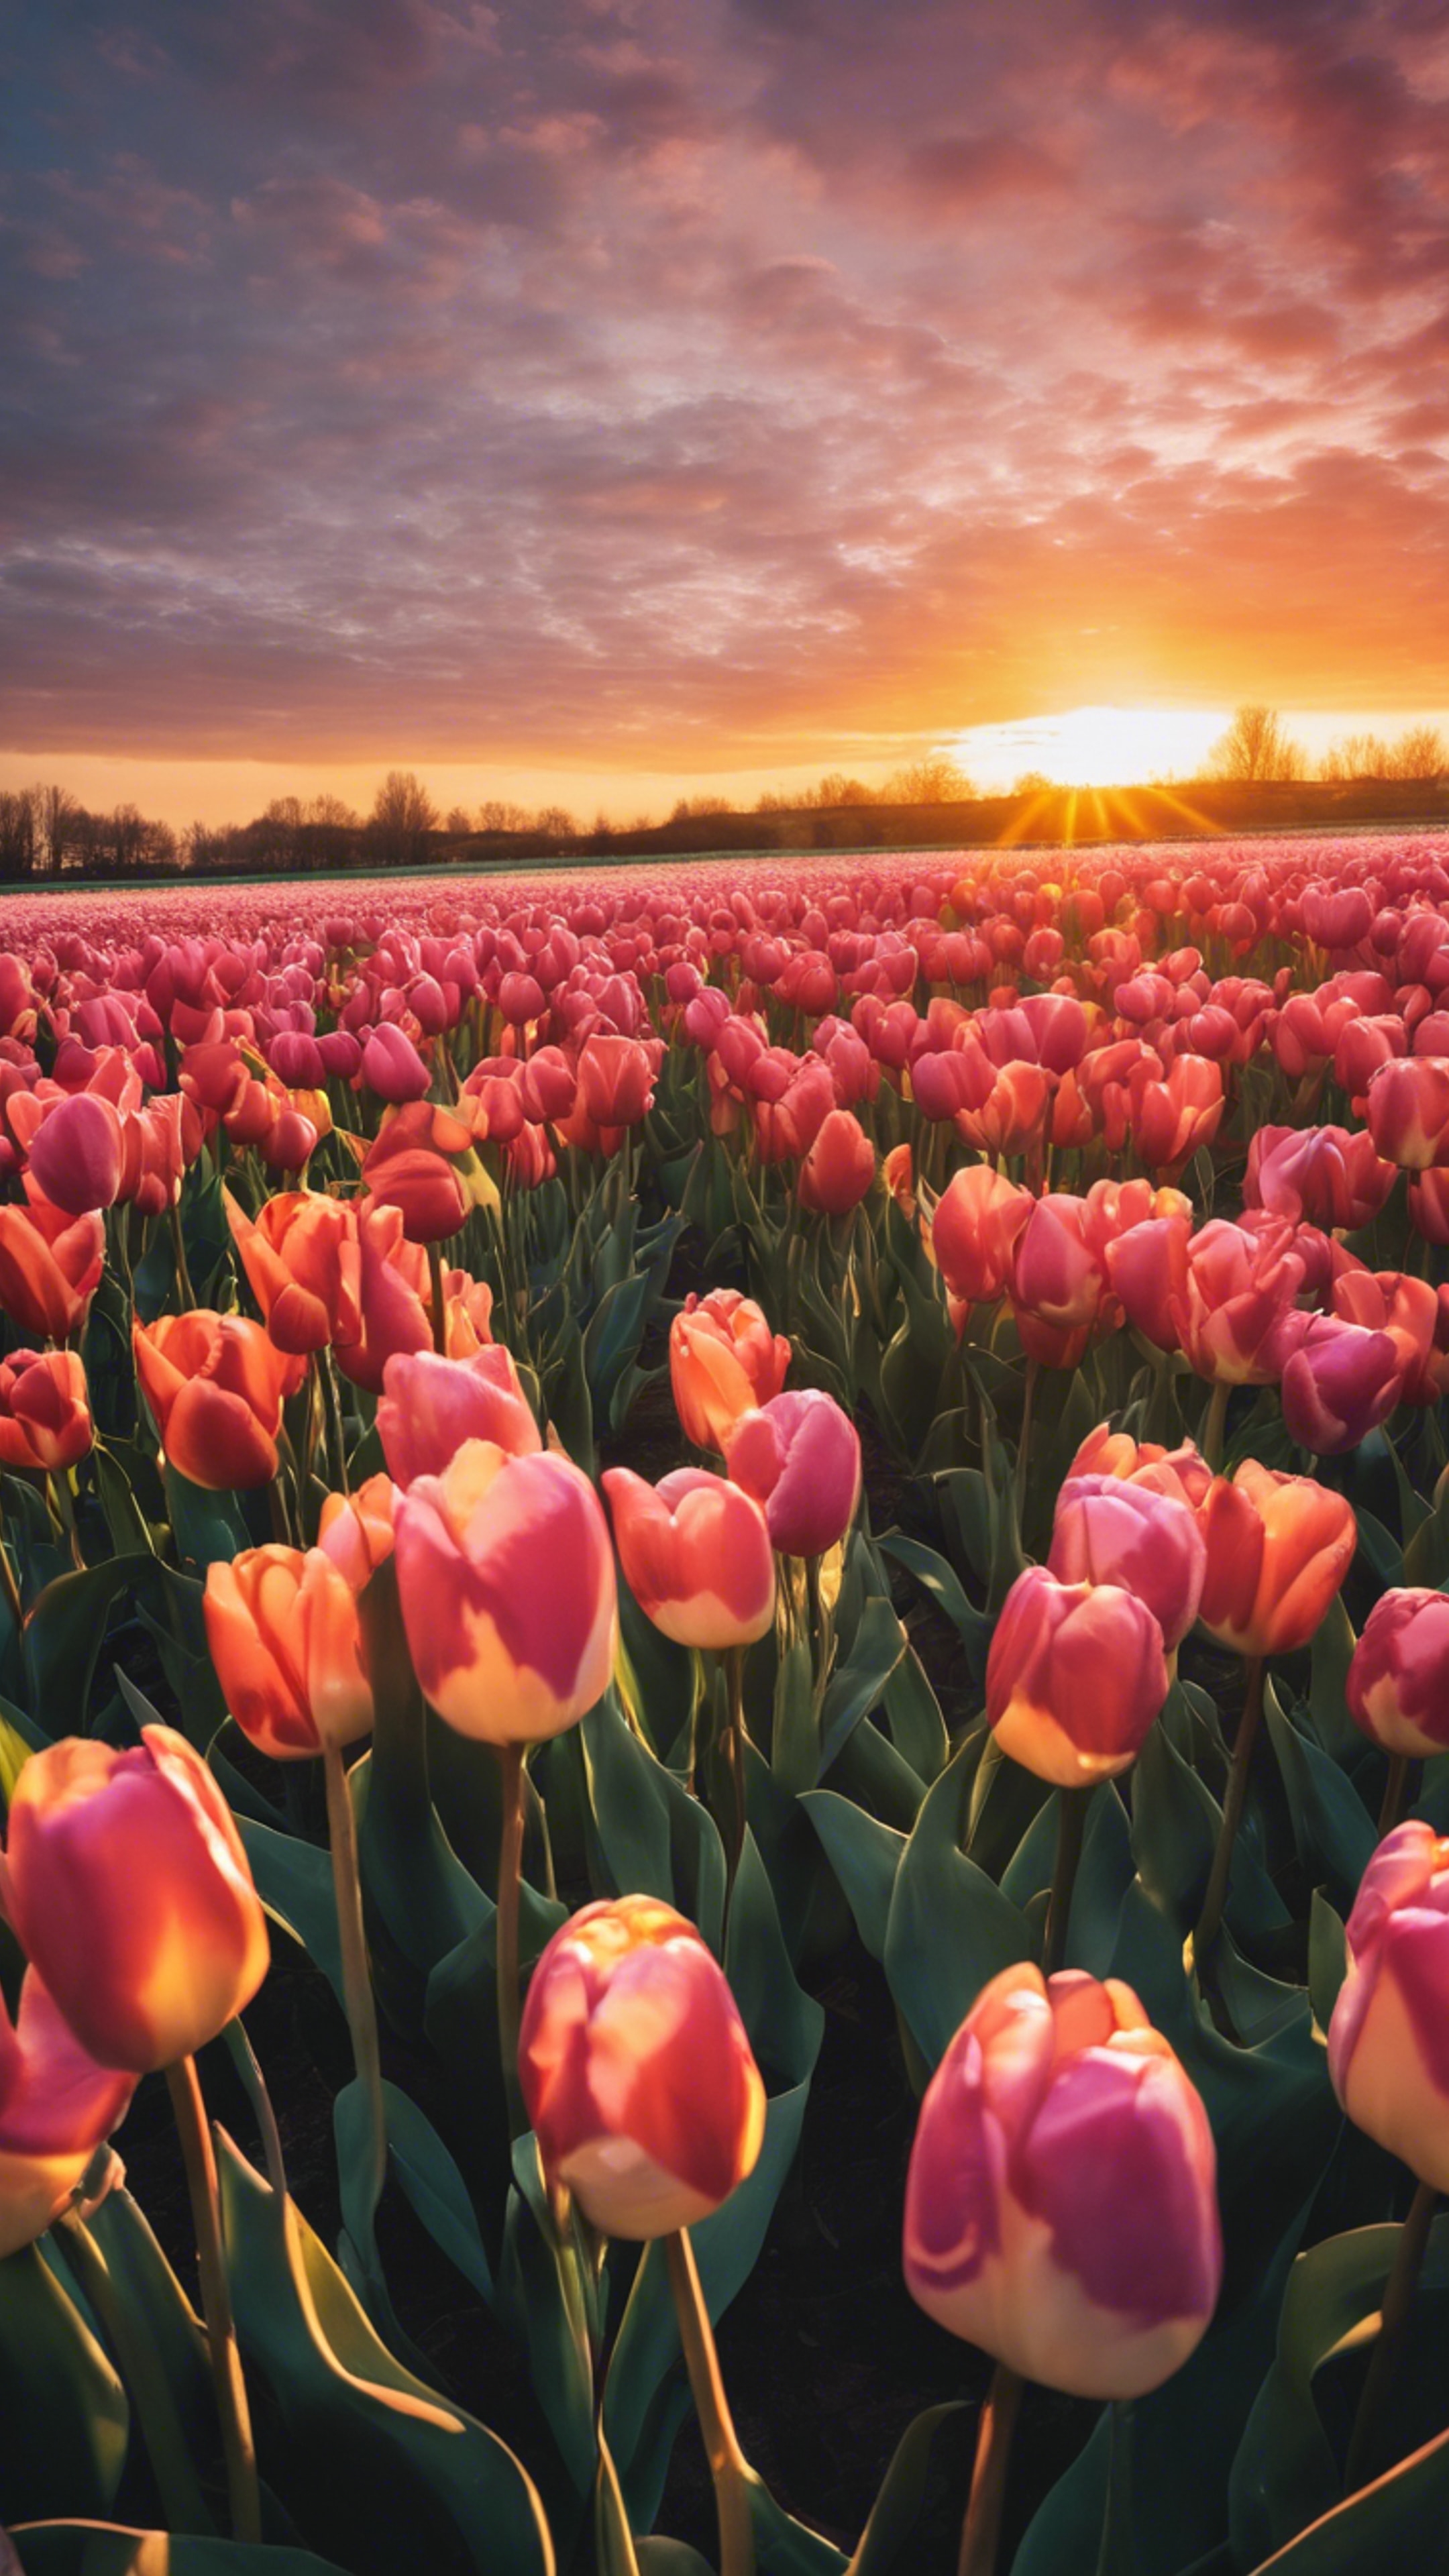 A beautiful sunset setting seen through a prism of tulips.壁紙[f8f049e47b844ba1a438]